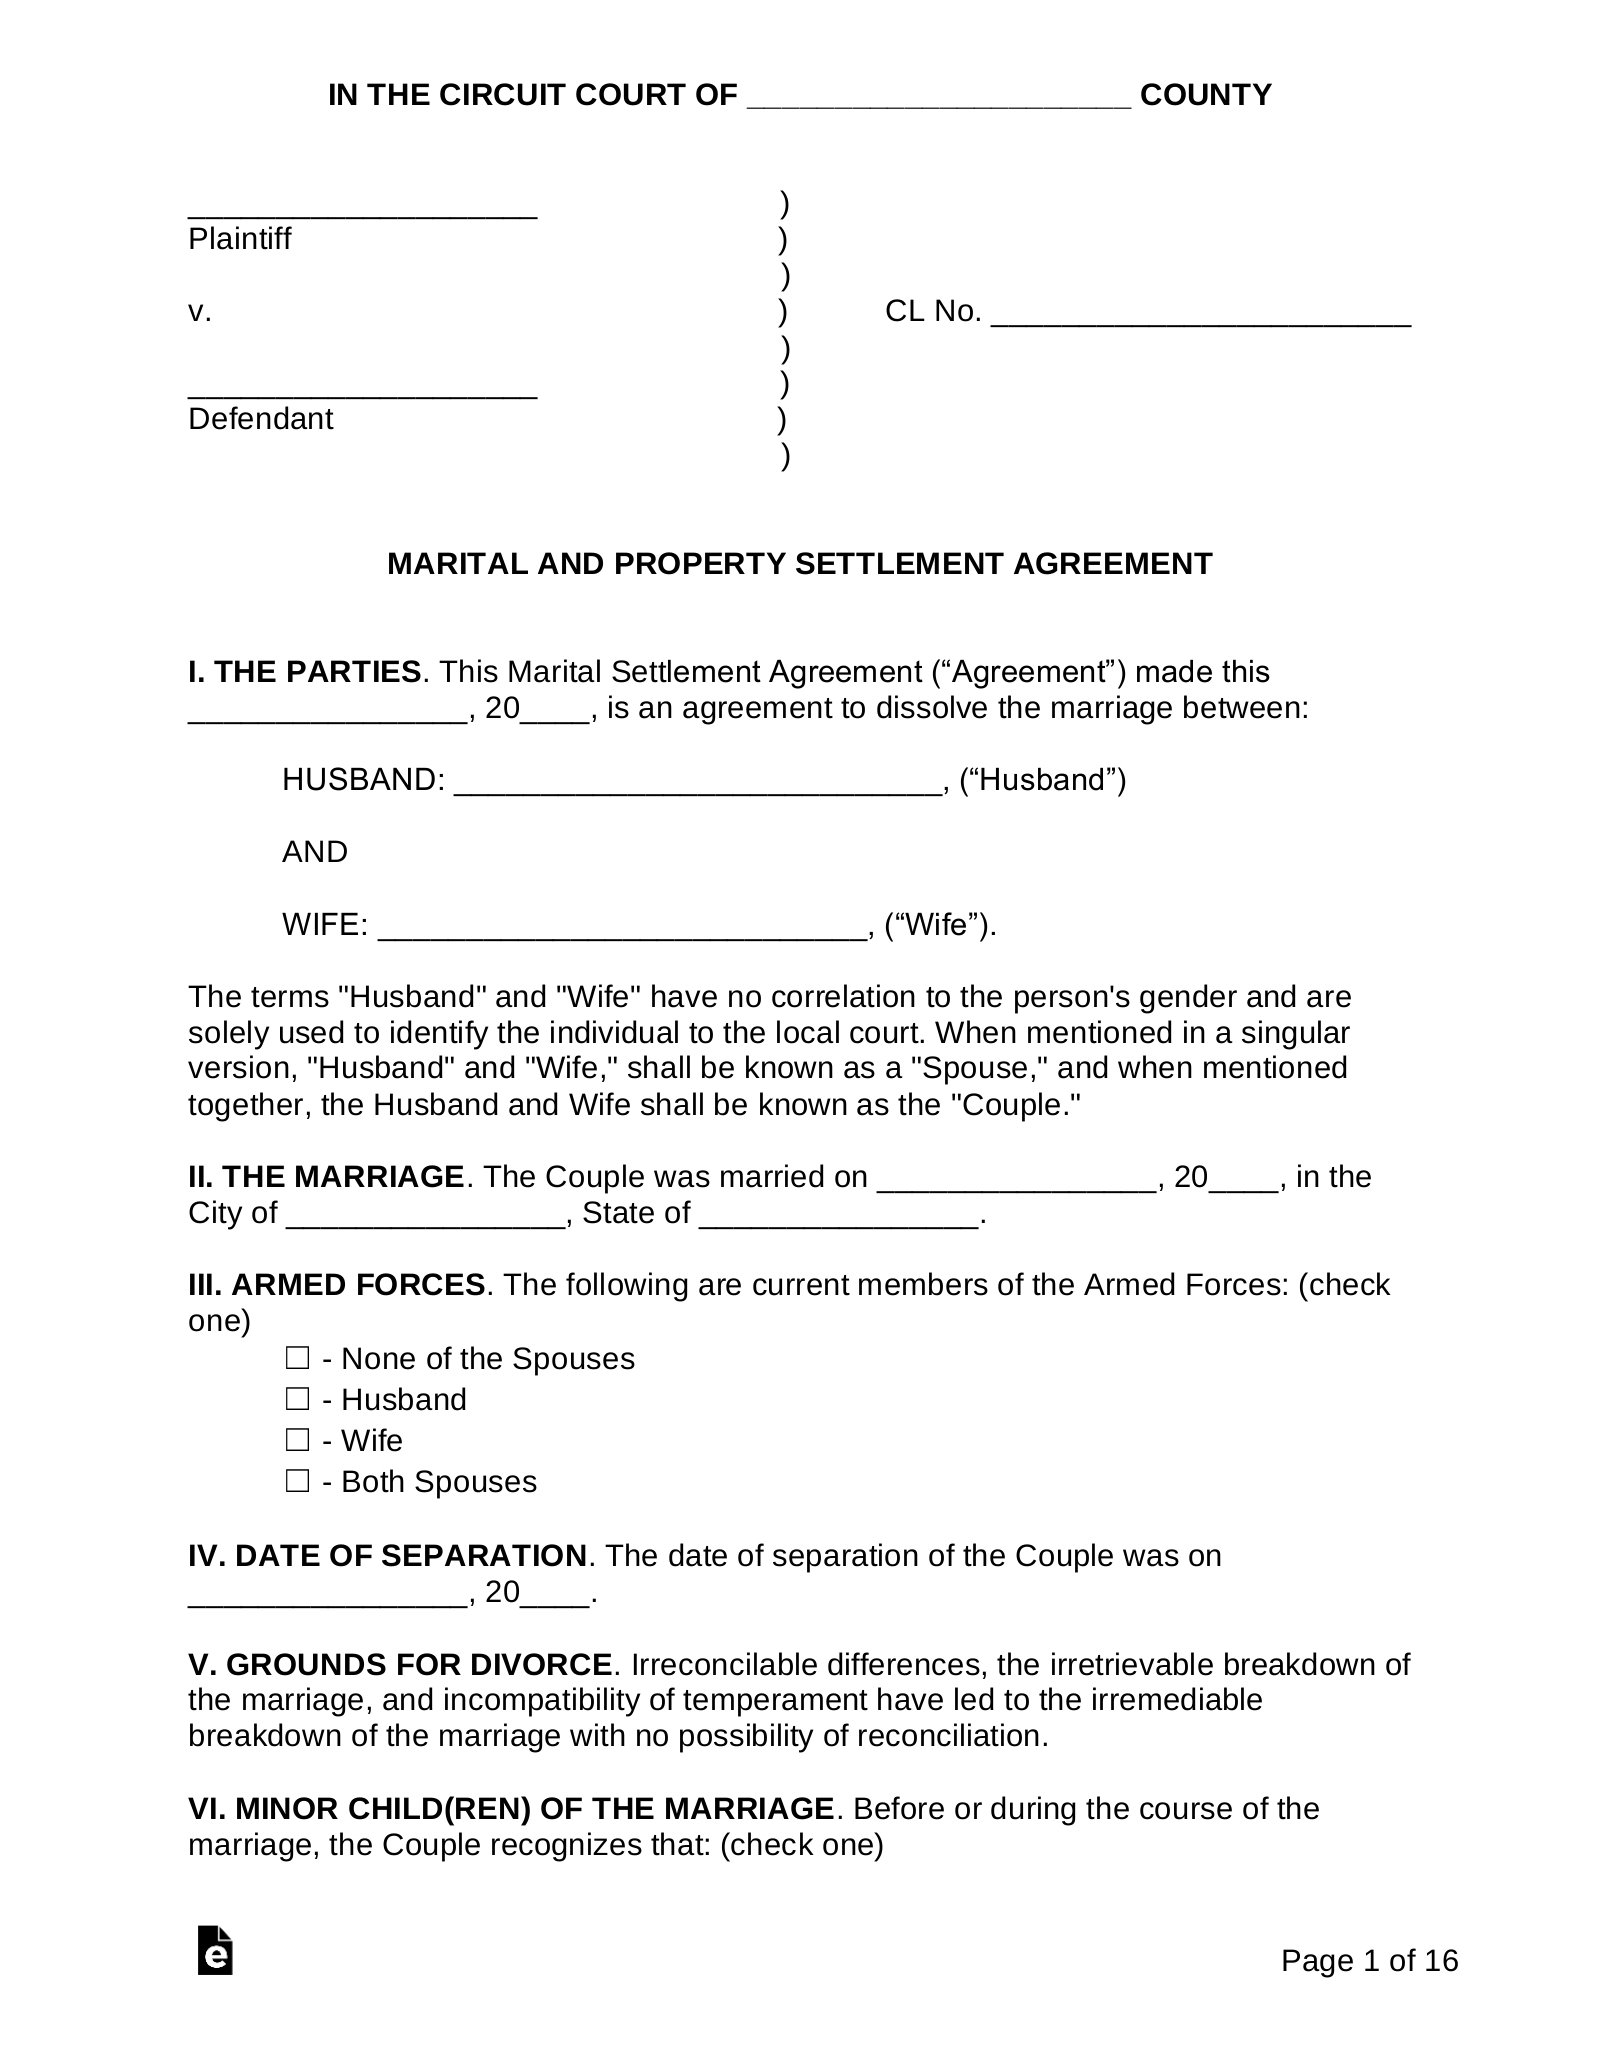 Professional Division Of Assets Agreement Template